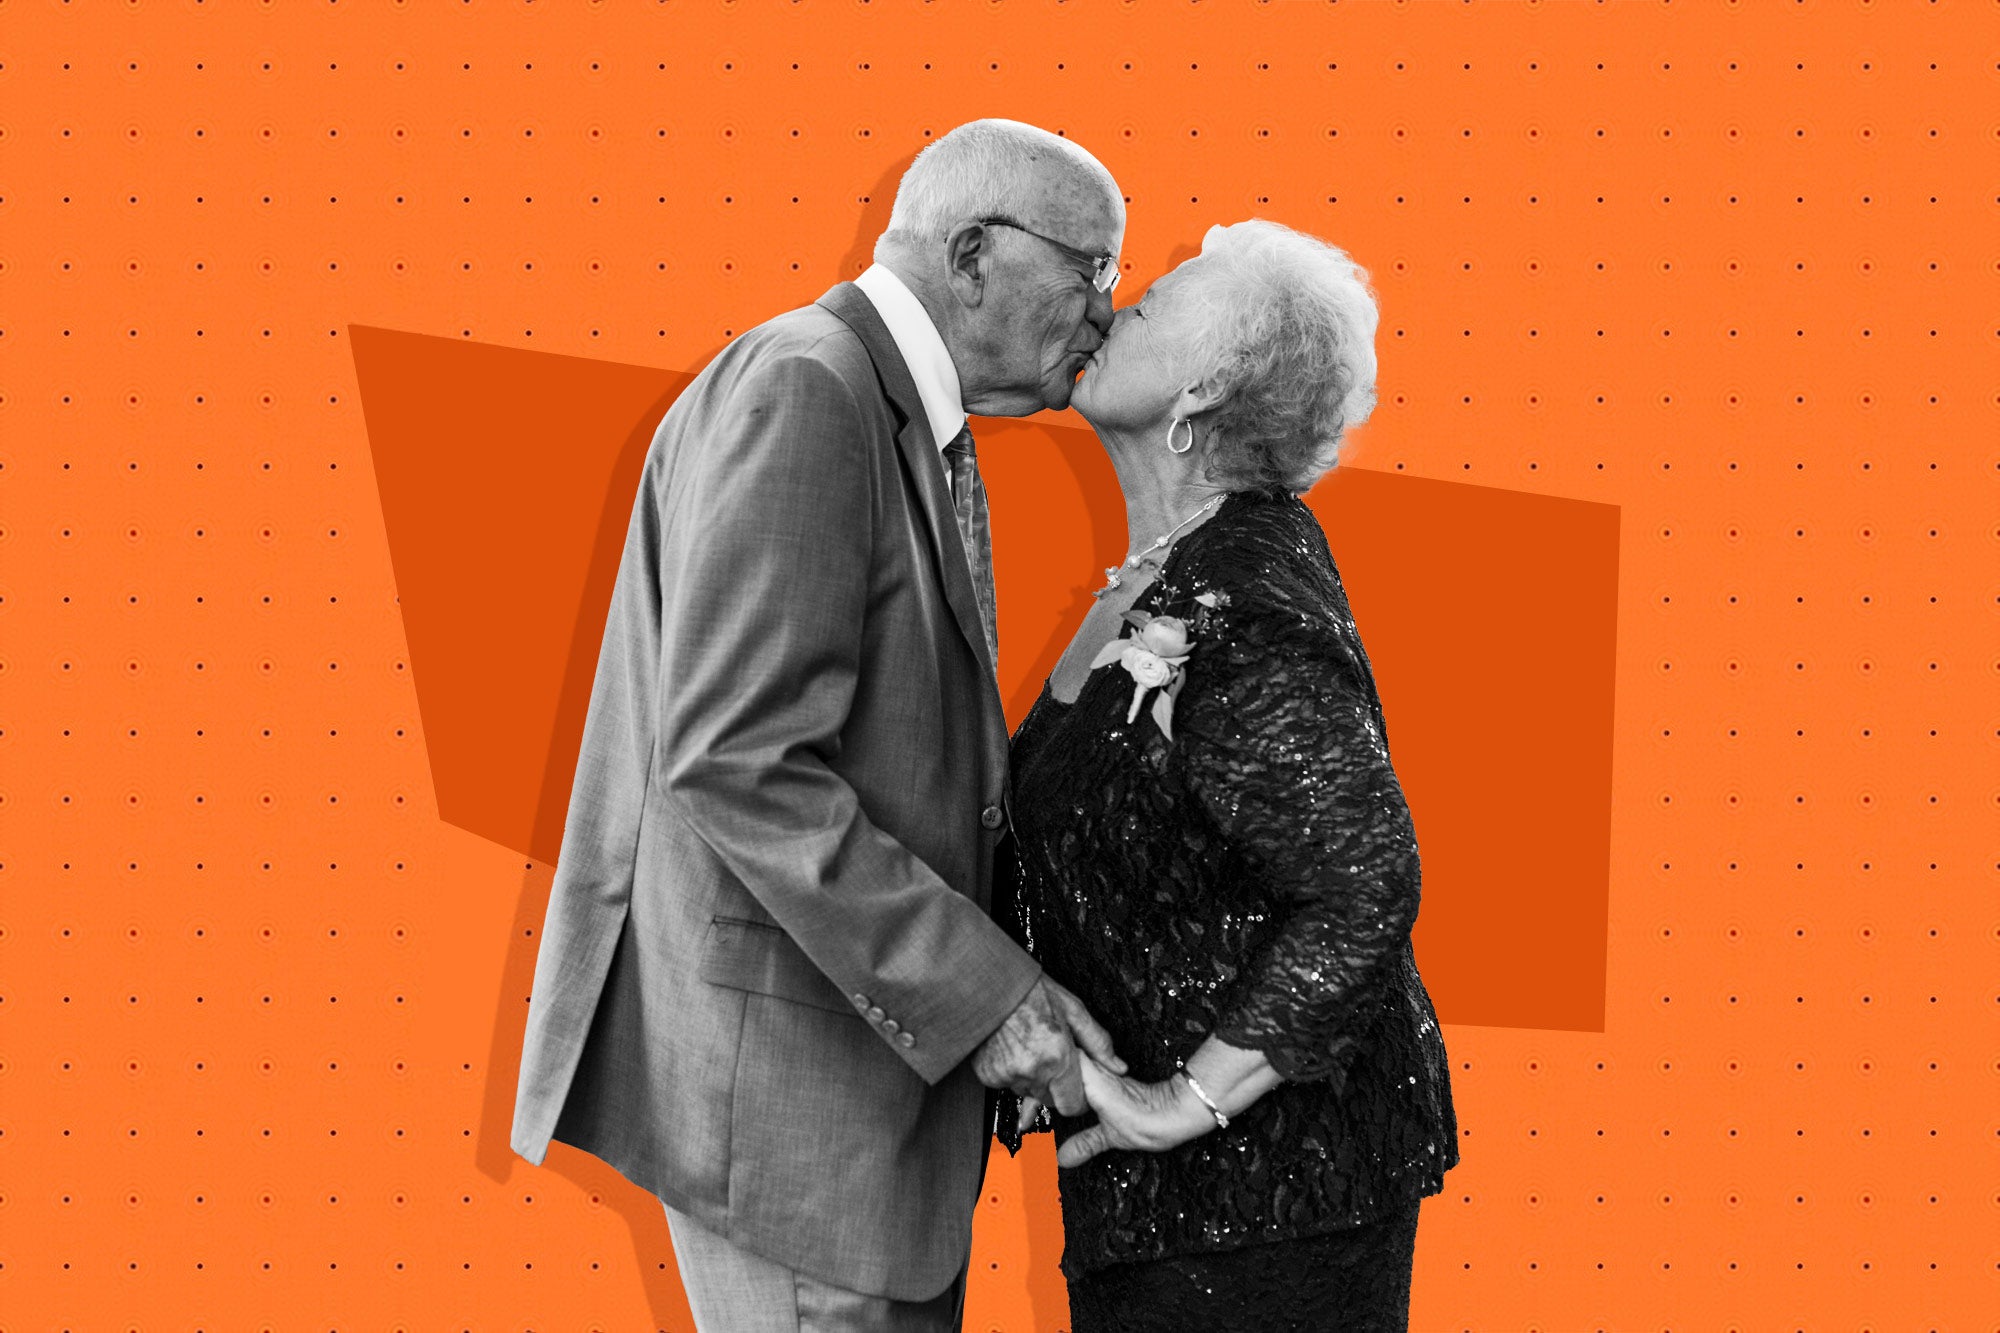 What an open relationship means when youre in your 70s.